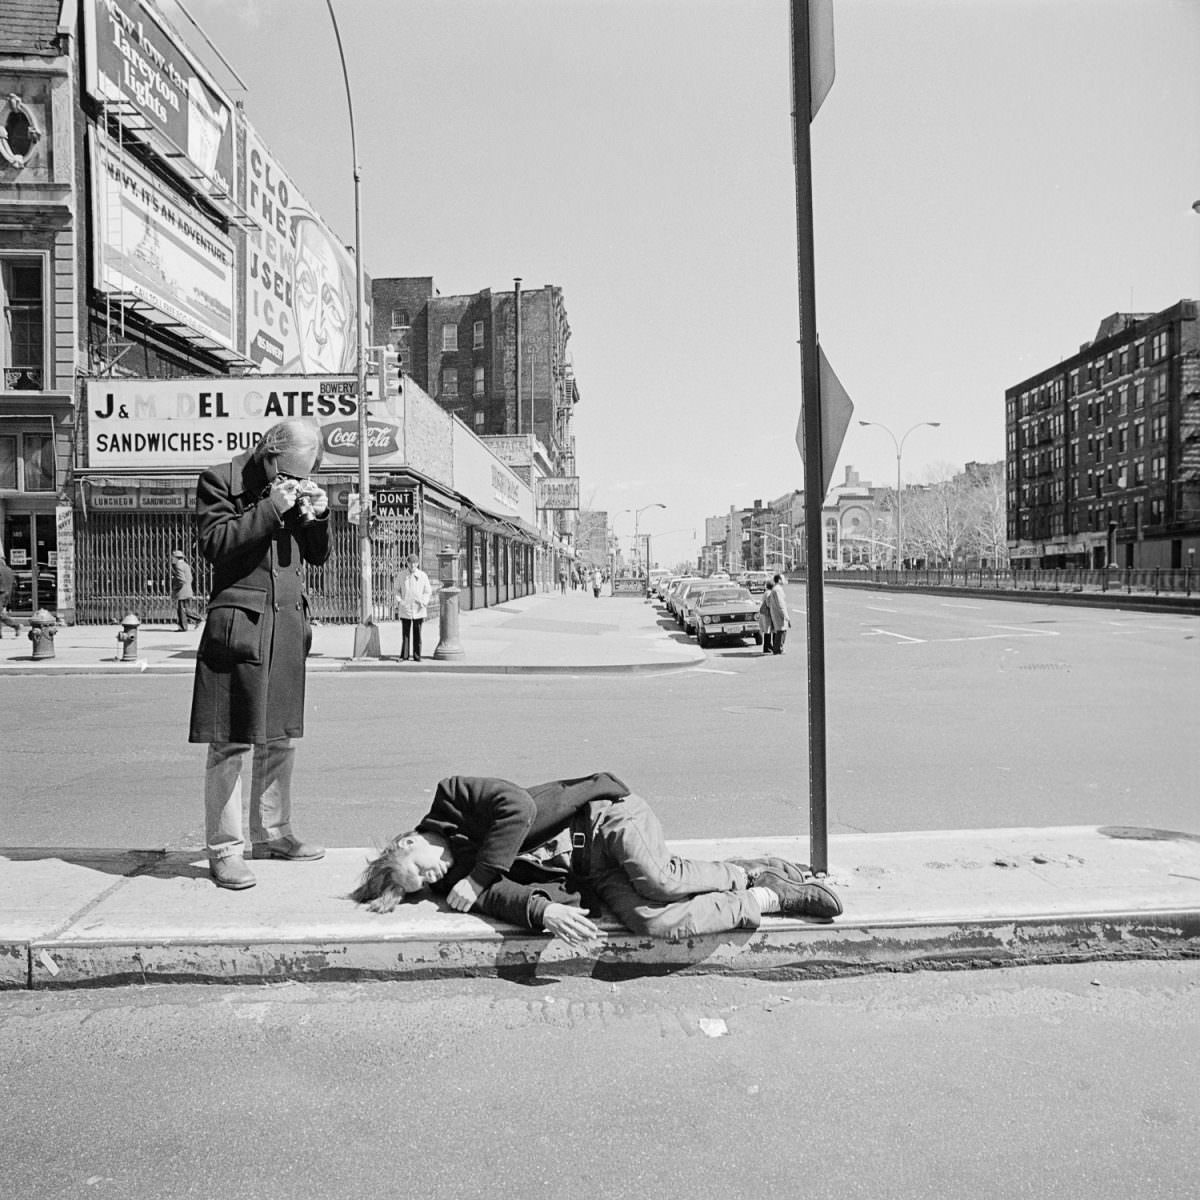 The Bowery, Lower East Side, 1977